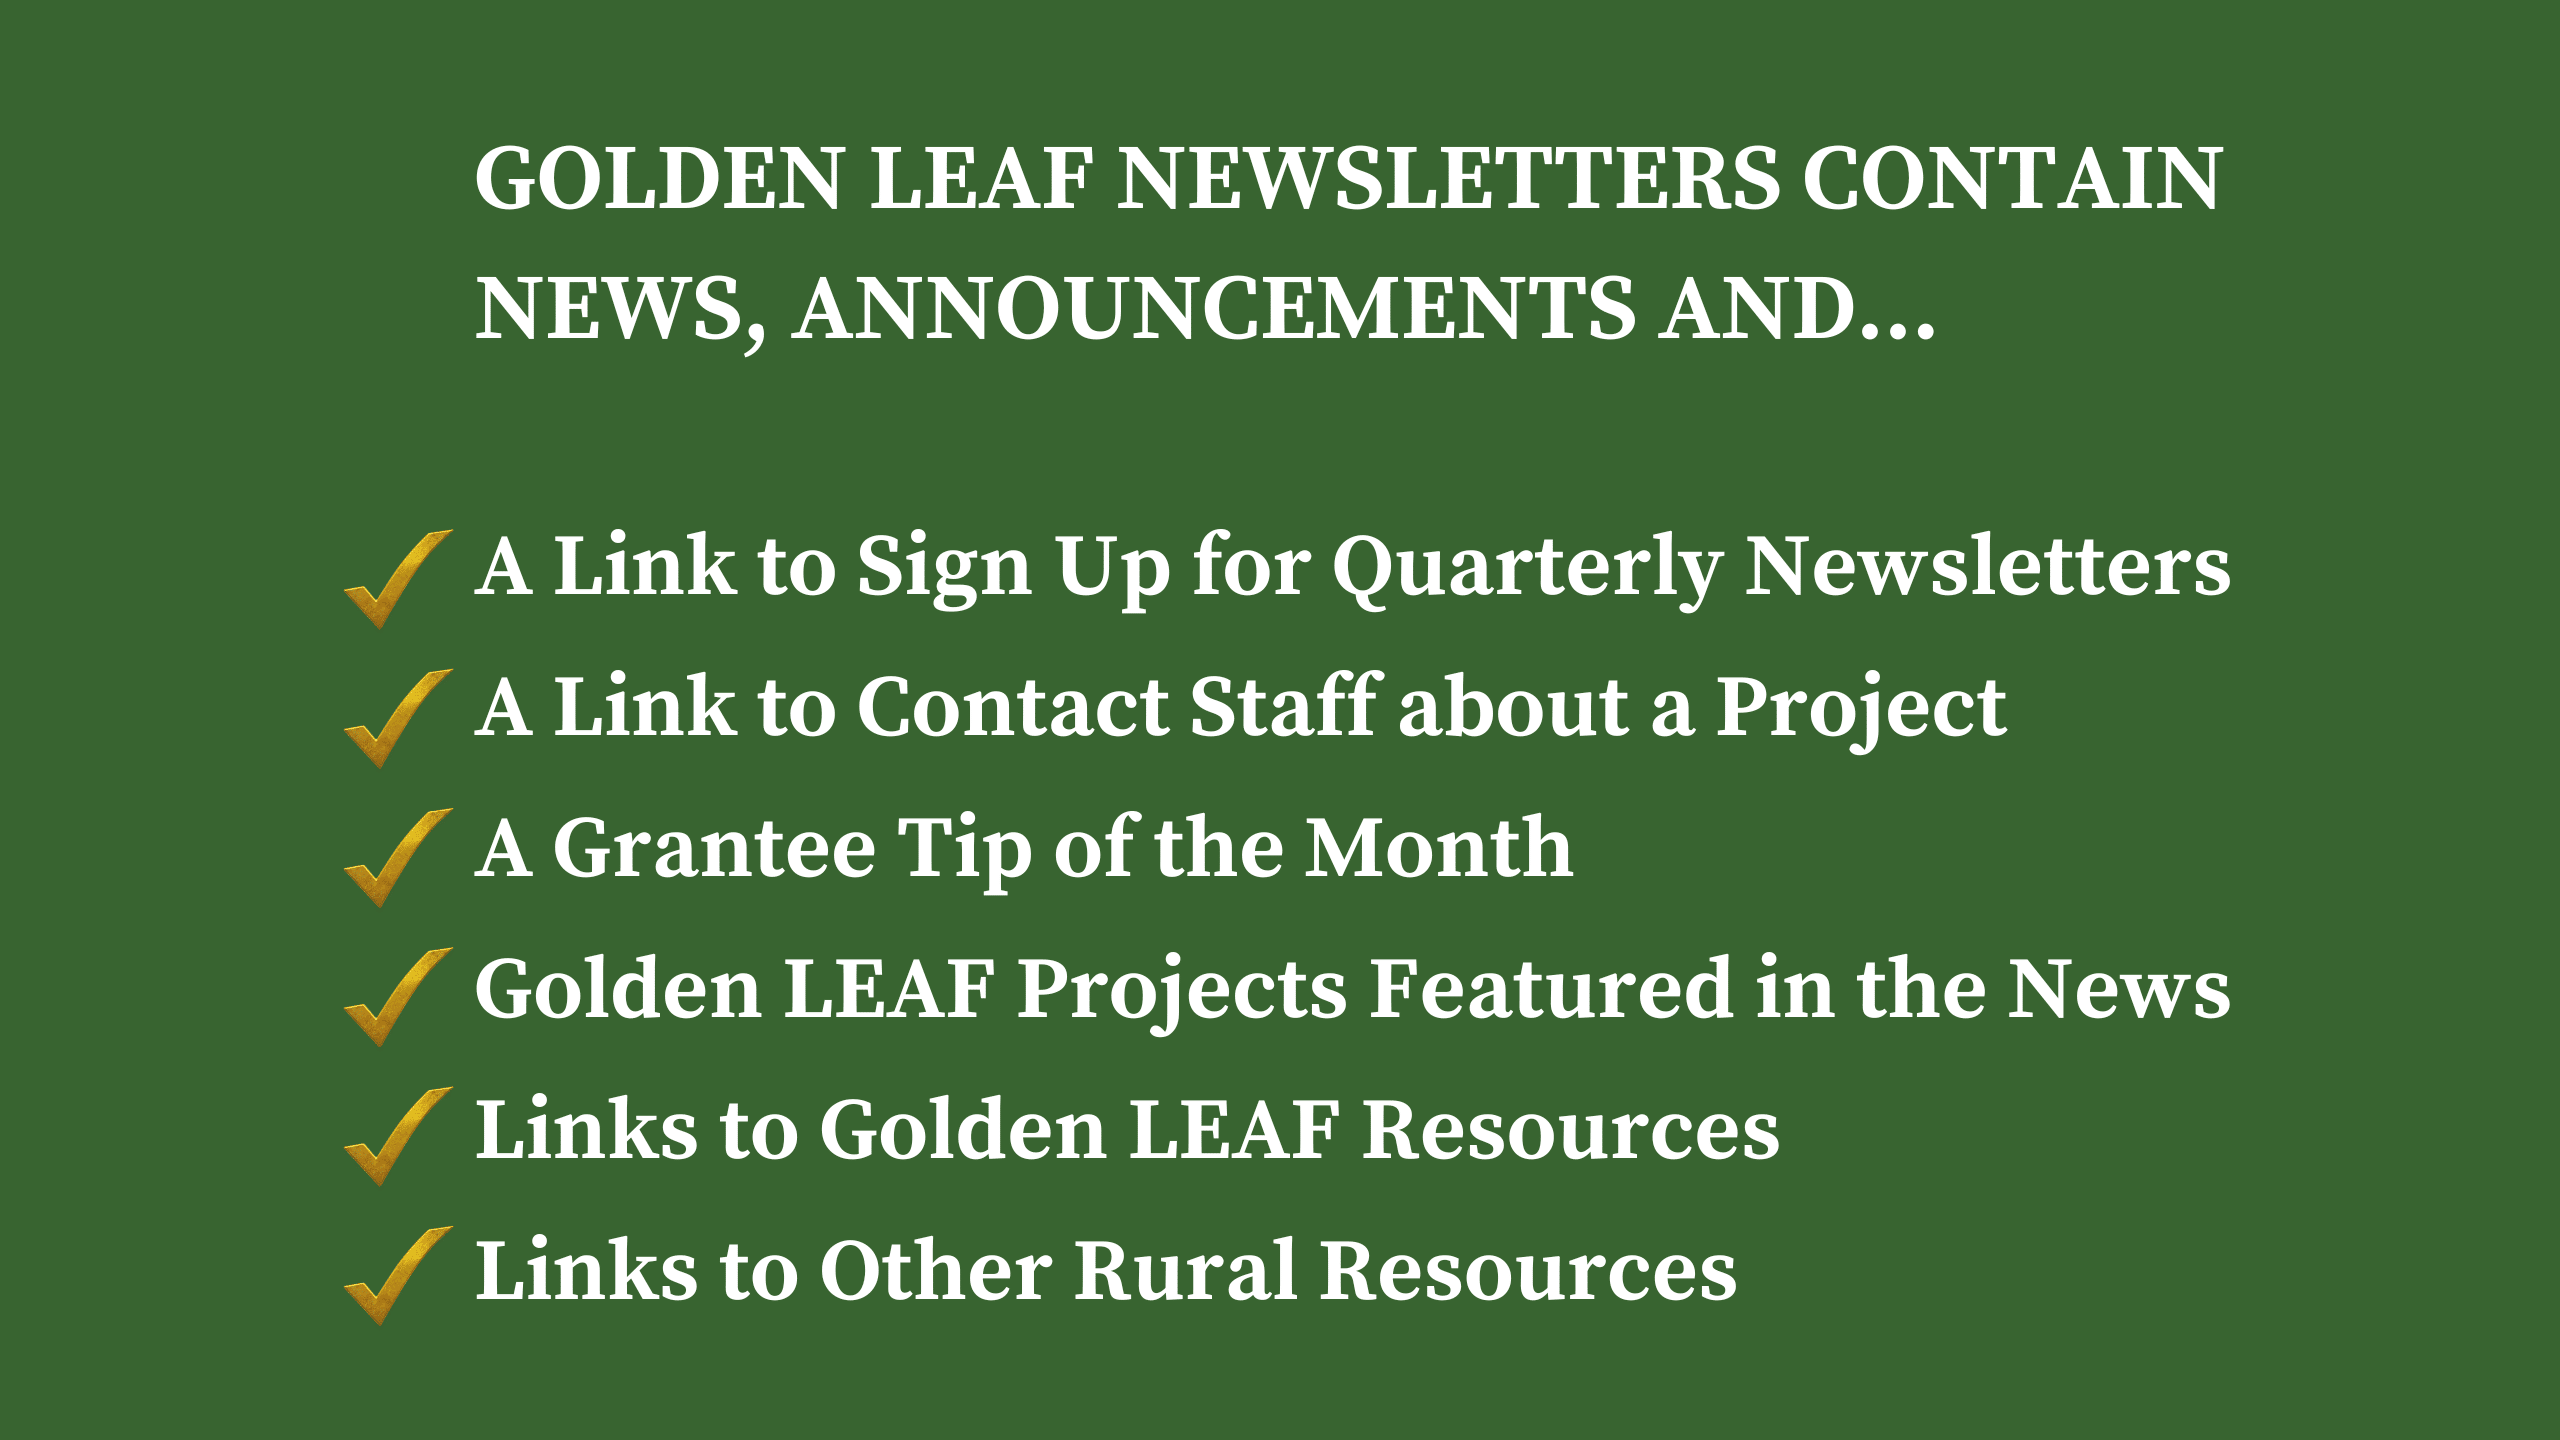 What information is in a Golden LEAF Newsletter?